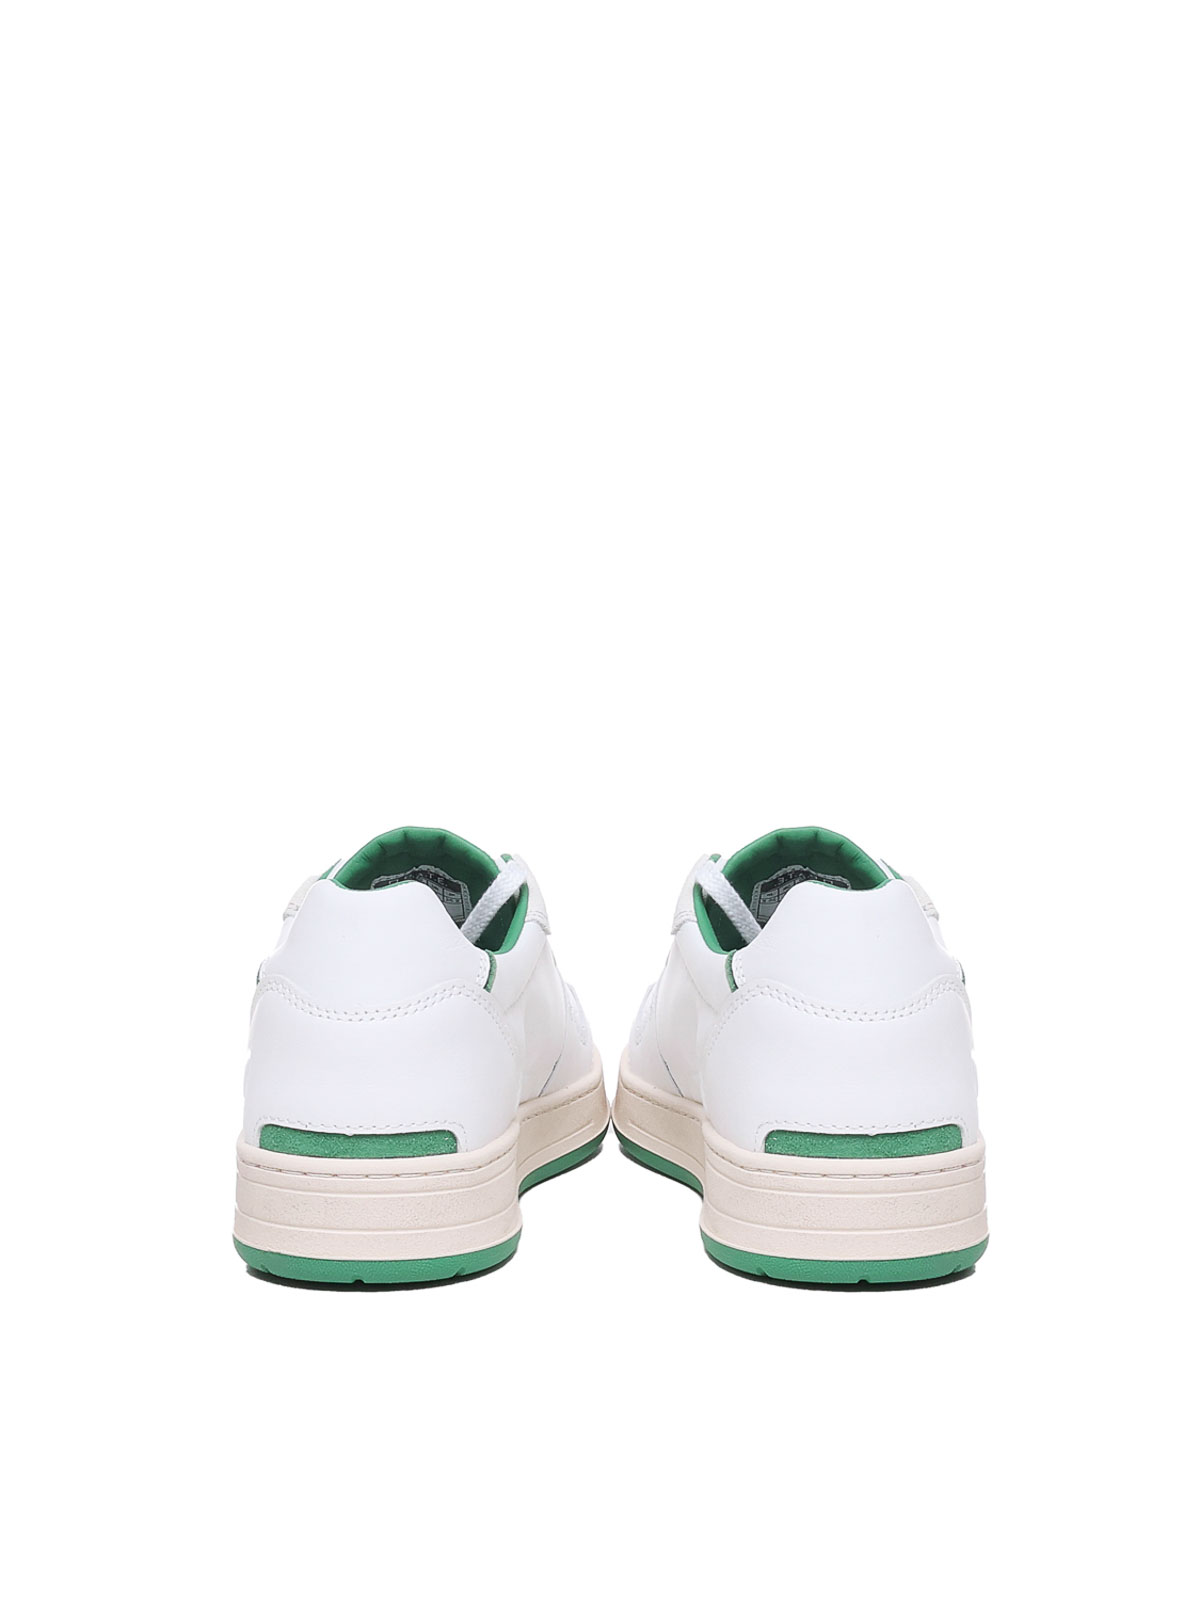 Shop Date Court 20 Sneakers In White